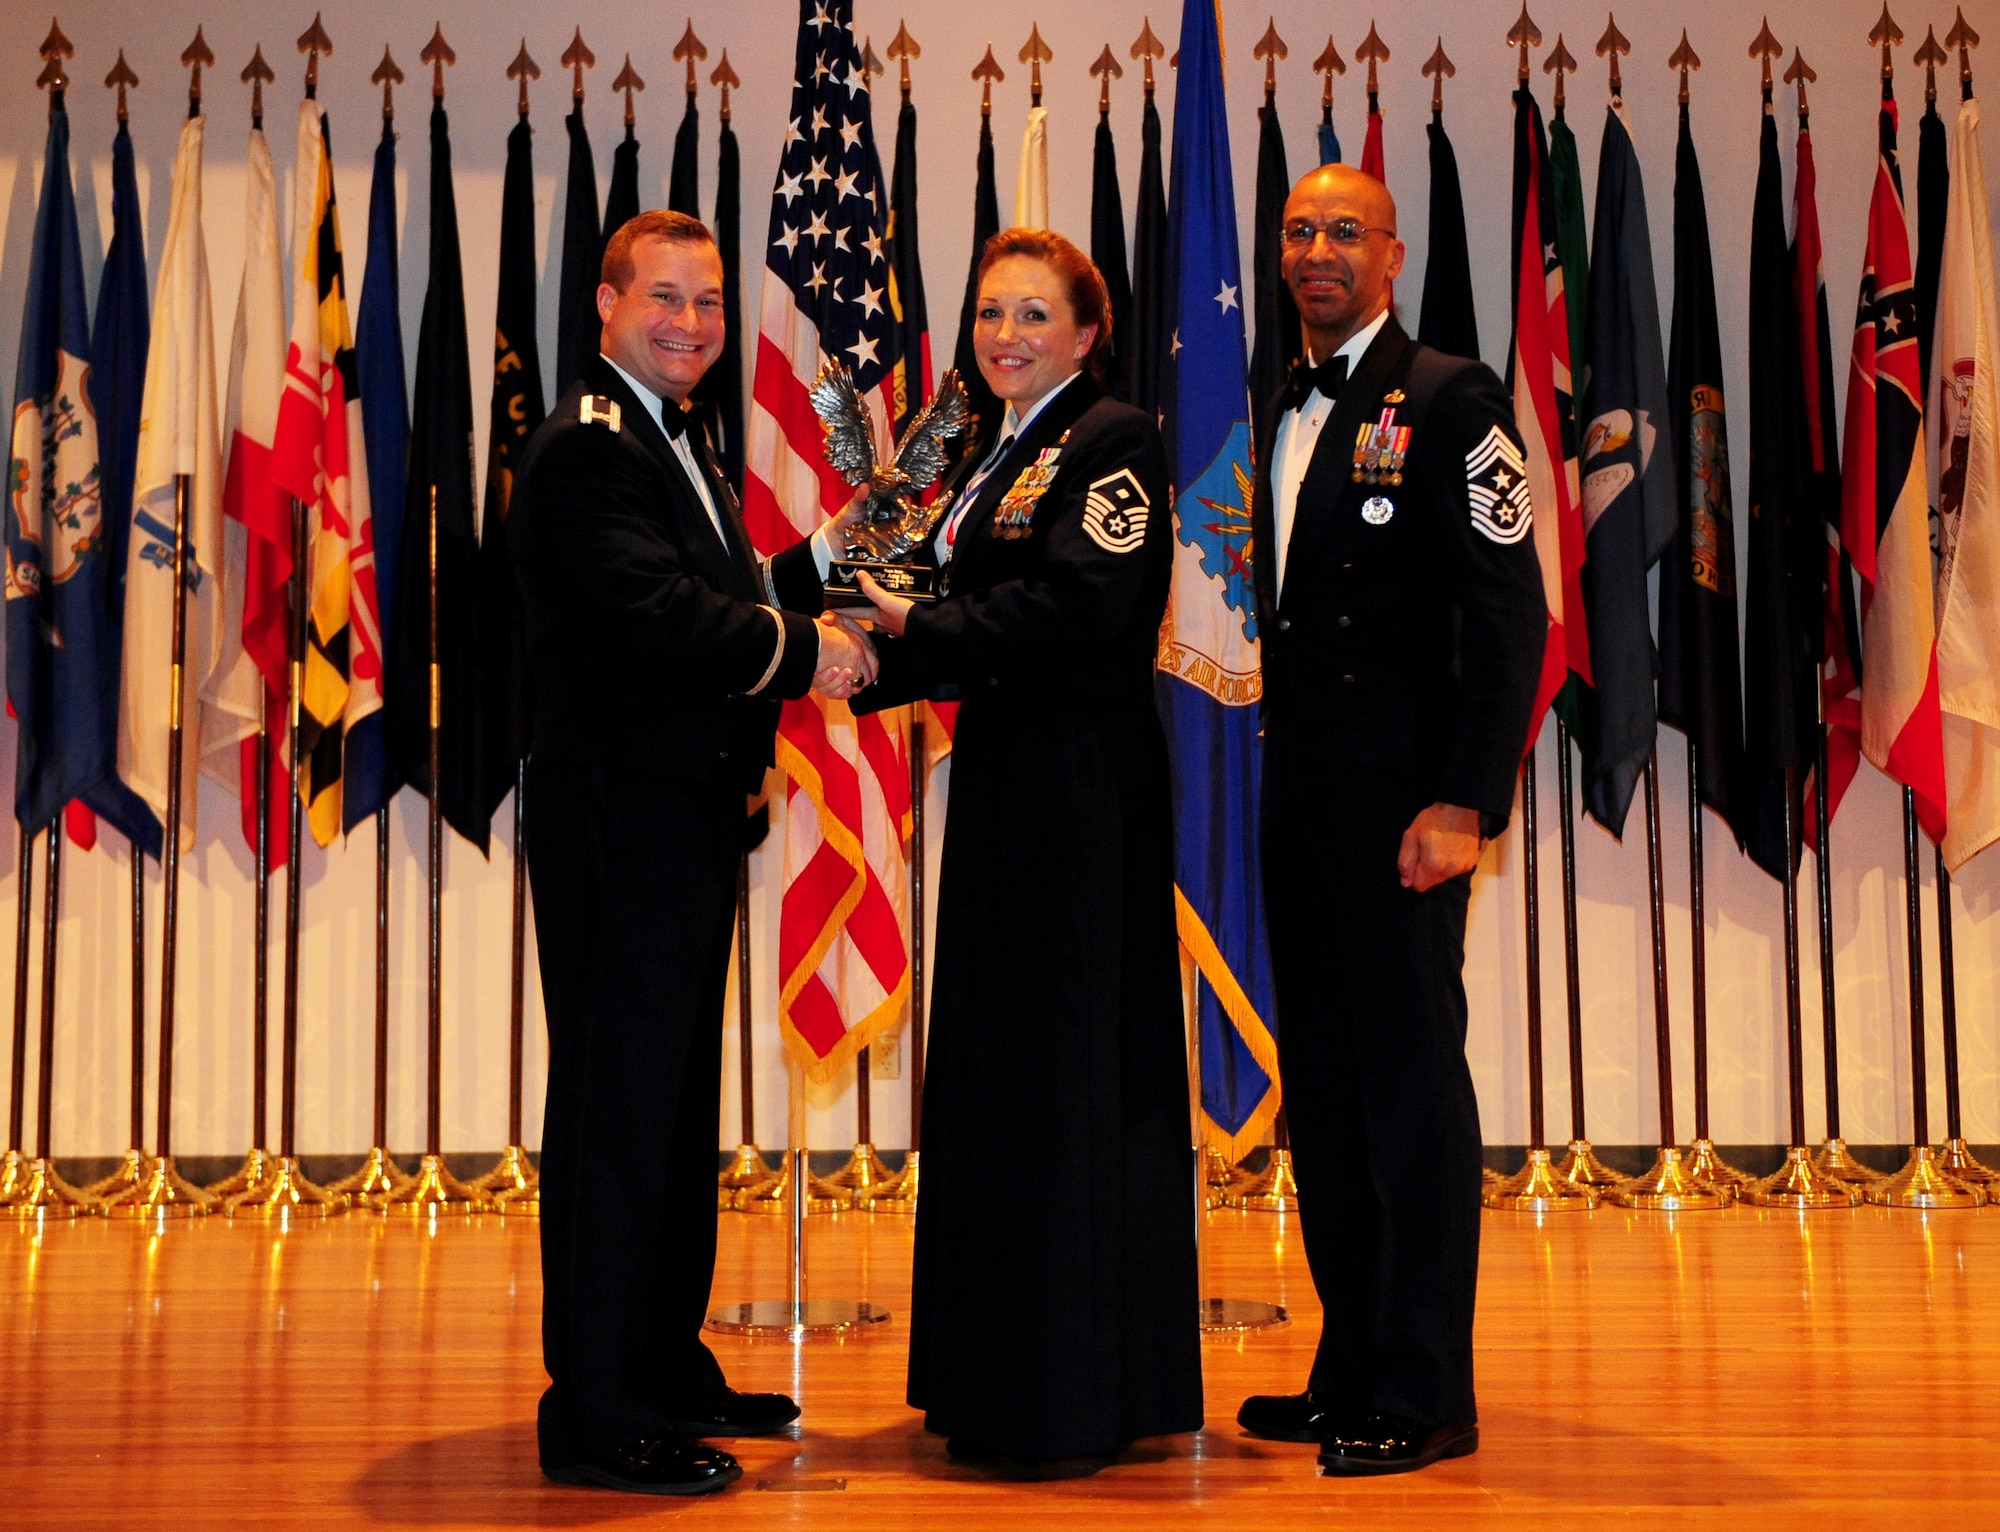 Master Sgt. Amy Riley (center), 9th Maintenance Group, is presented the award for Team Beale’s First Sergeant of the year by Col. Phil Stewart, 9th Reconnaissance Wing commander and Chief Master Sgt. Leslie Gould, 9th RW command chief, at the 2013 annual awards ceremony at Beale Air Force Base, Calif., Feb. 7, 2014. (U.S. Air Force photo by Airman 1st Class Bobby Cummings/Released)